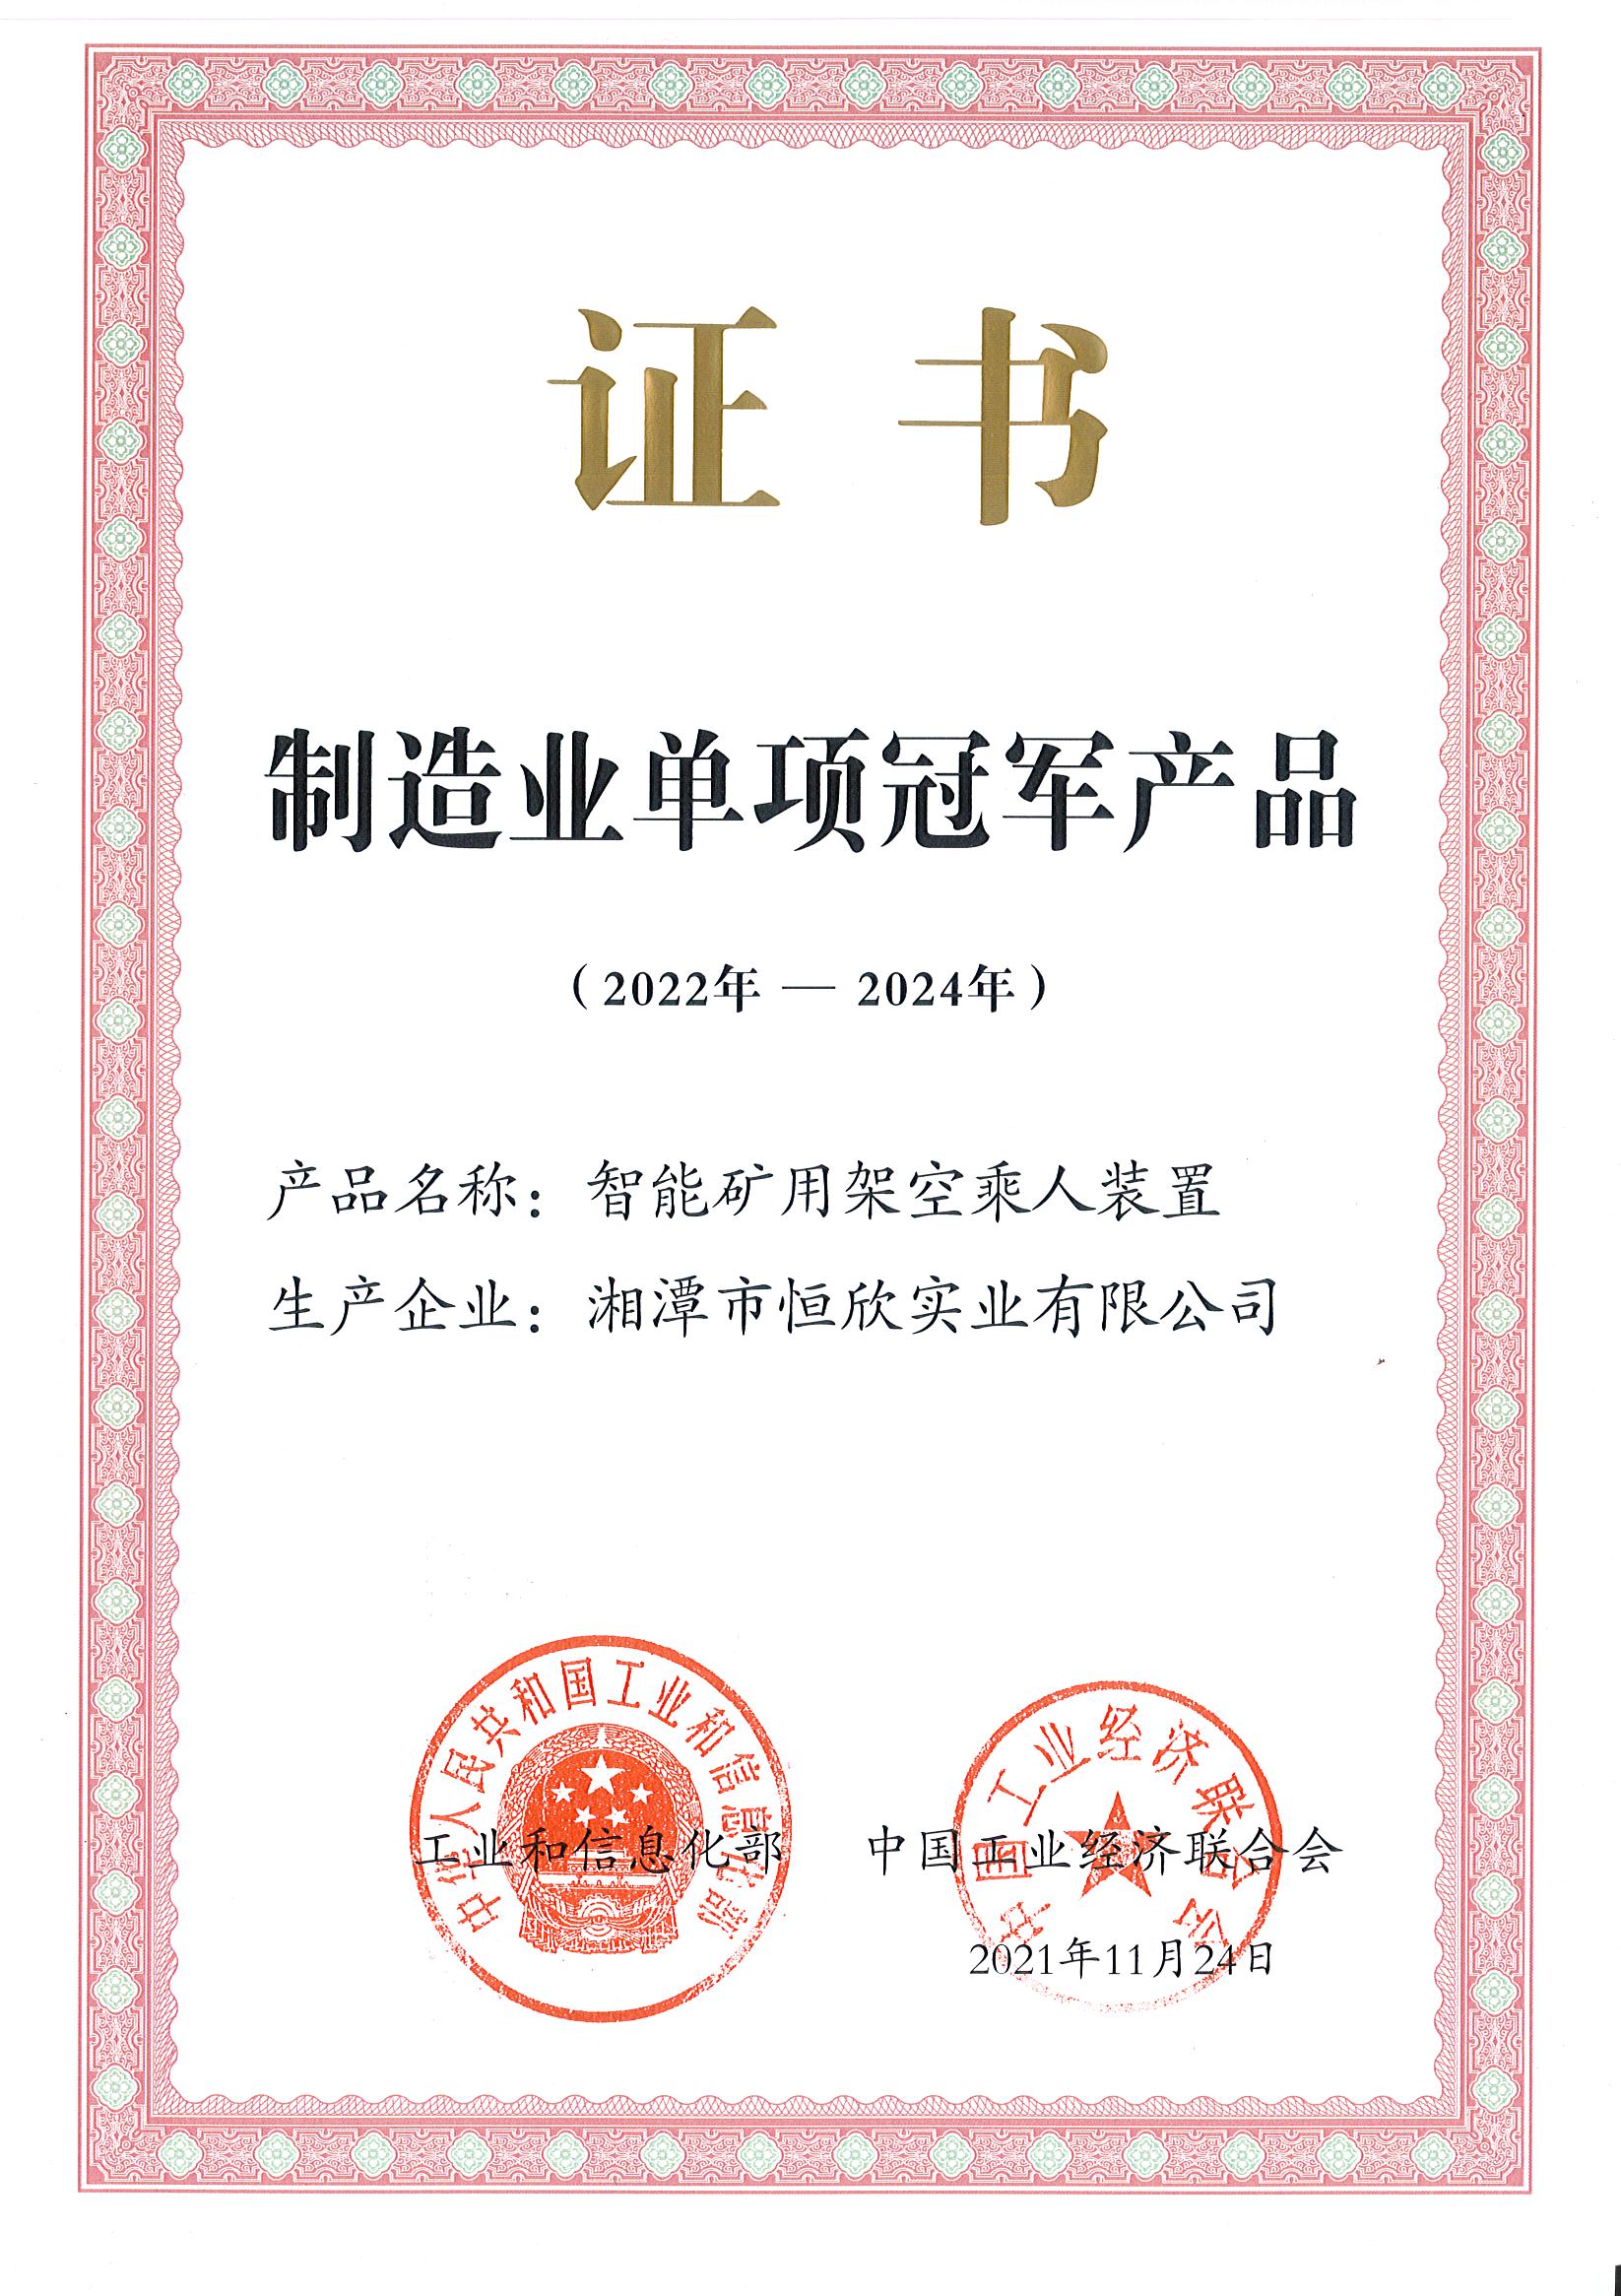 The Ministry of Industry and Information Technology has issued a certificate for our company's single champion product